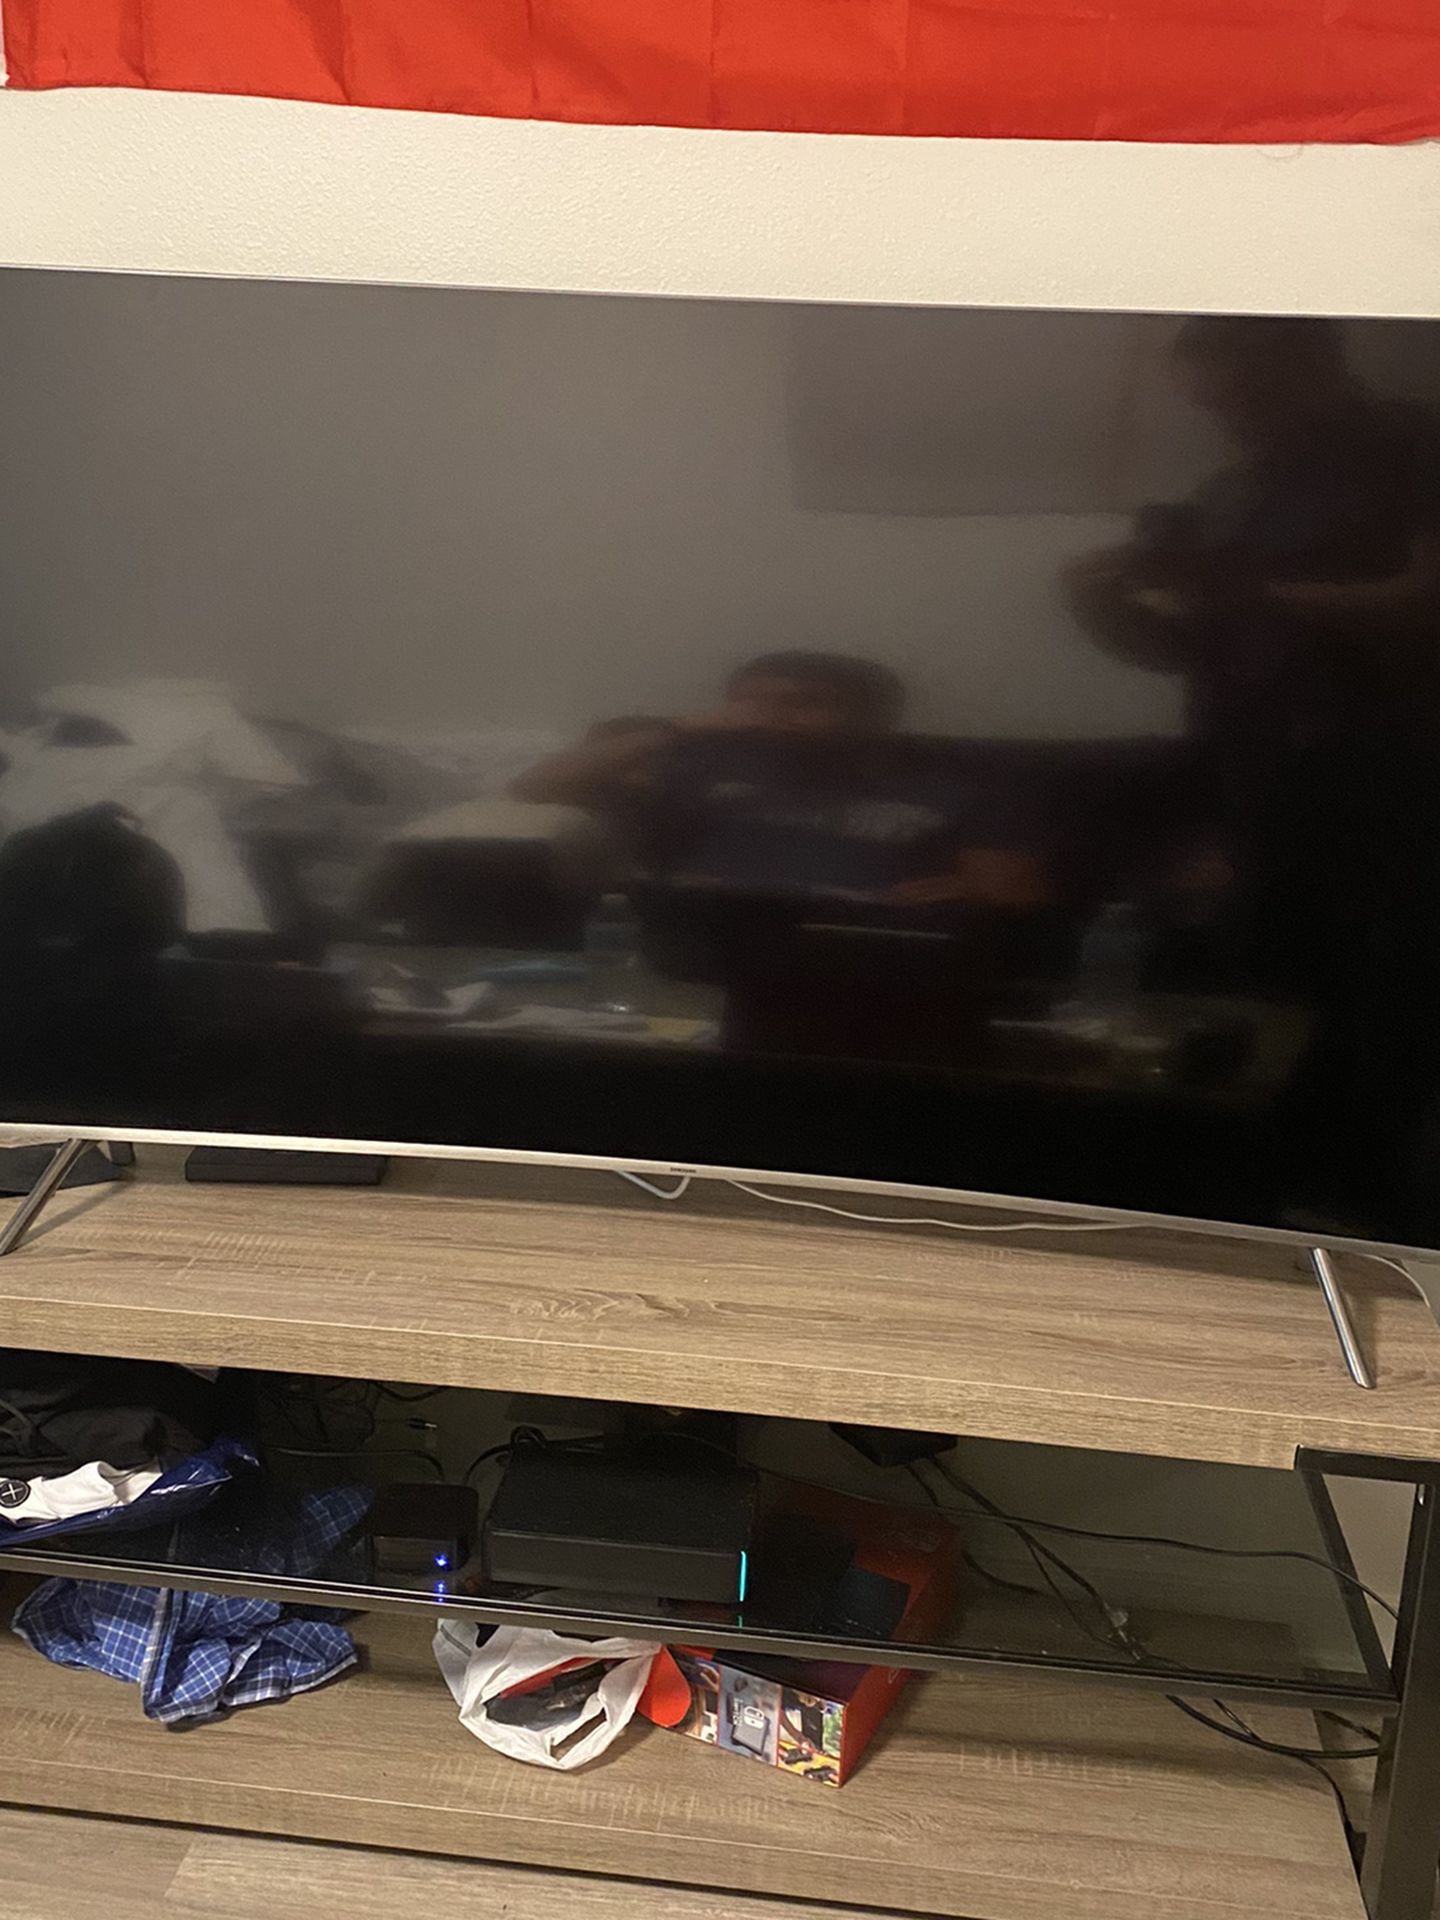 Samsung 65 inch Curved Smart TV 4K with its Stand.